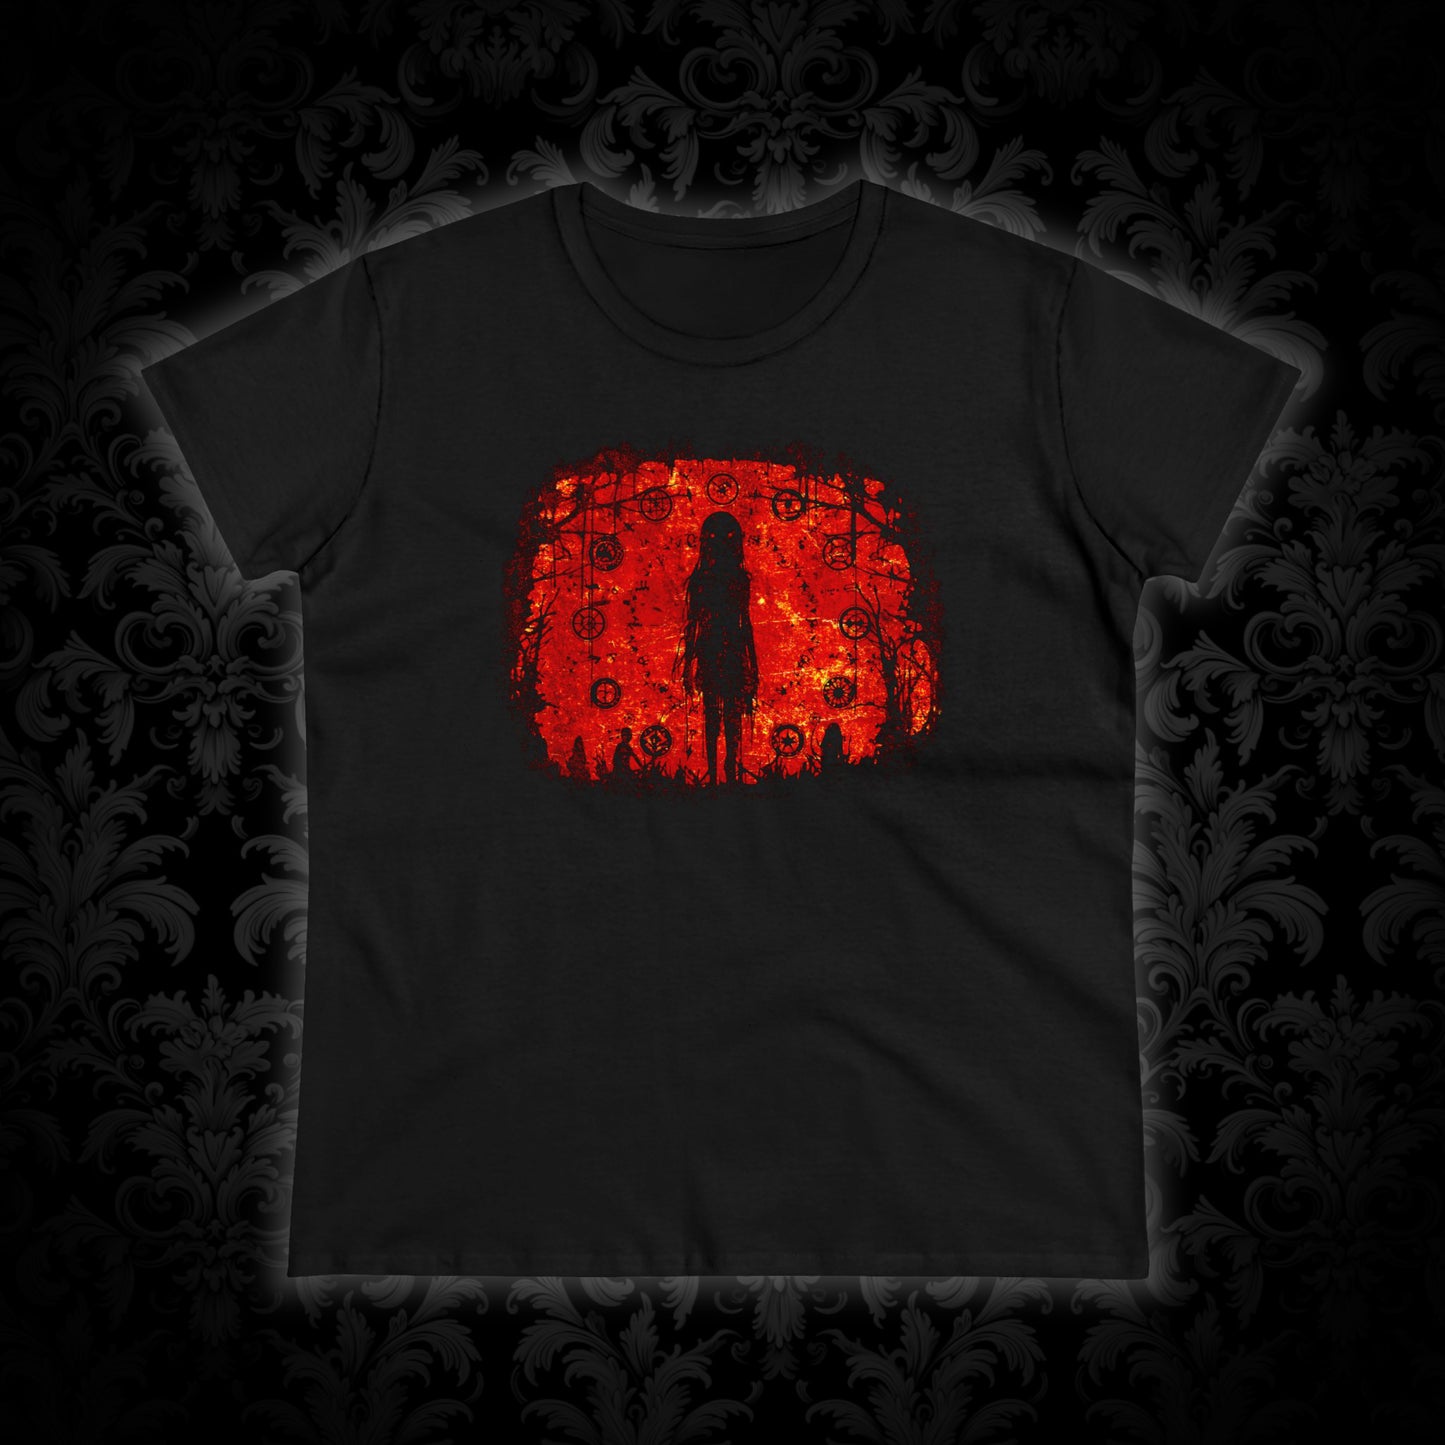 Women's T-shirt Evil is Here in Red - Frogos Design